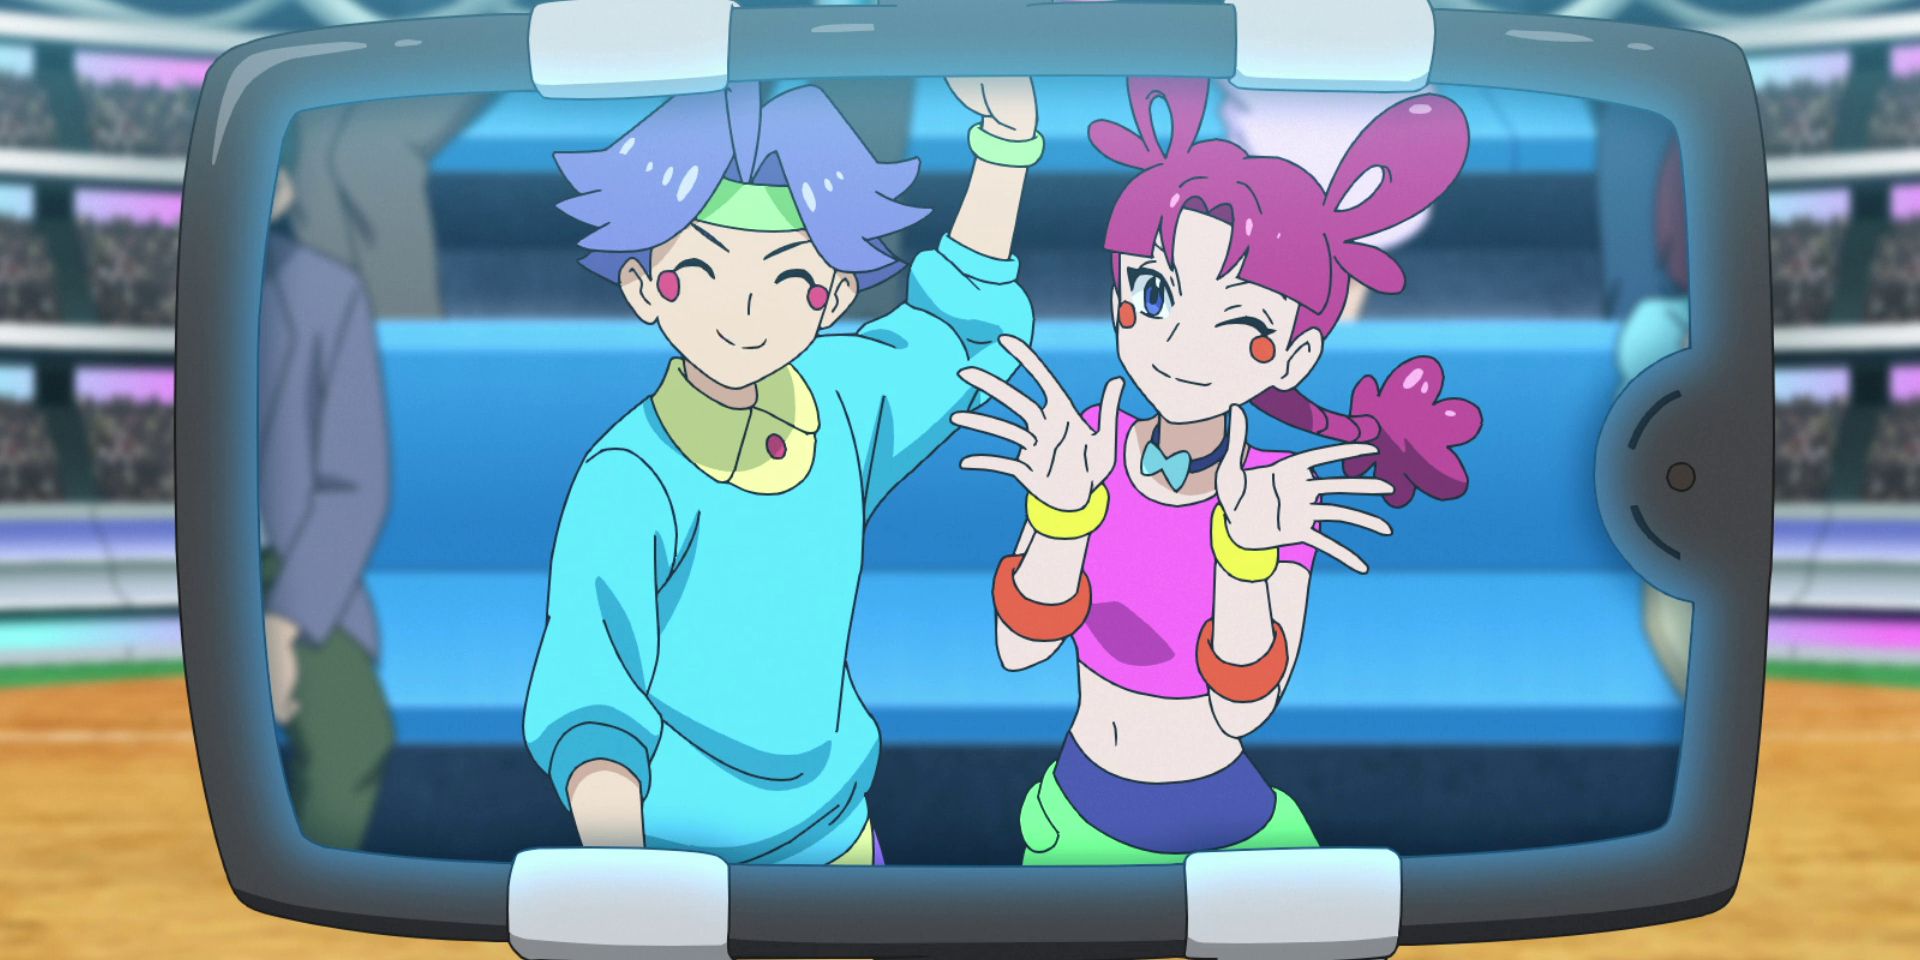 Jessie and James as World Masters streamers in Pokemon anime